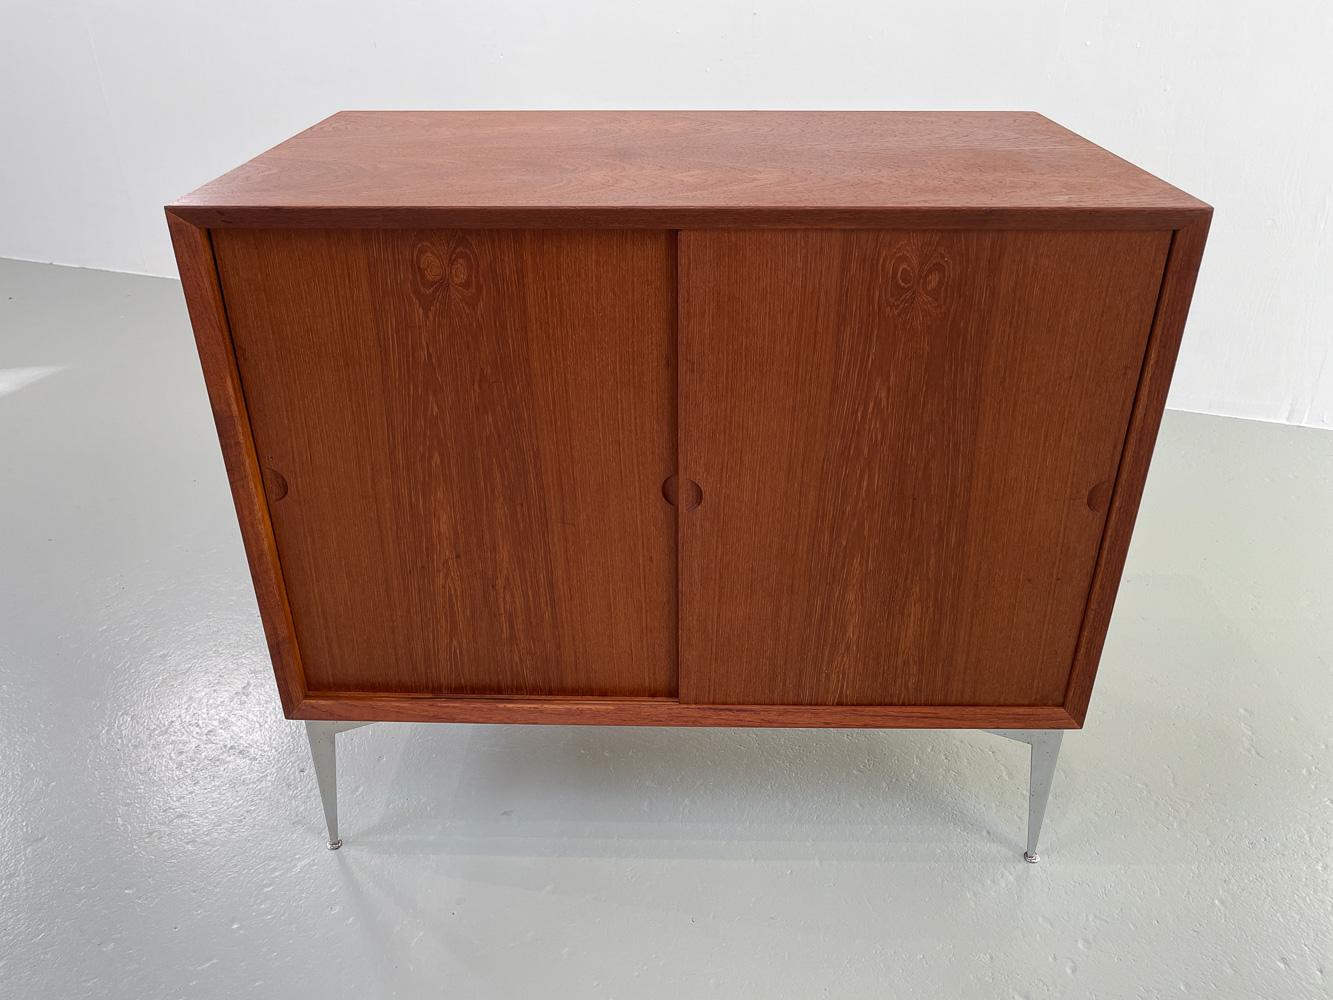 Danish Modern Teak Cabinet by Poul Cadovius for Cado, 1960s.
Vintage Scandinavian Mid-Century Modern teak sideboard with double sliding doors. Standing on four original and rare Cado metal legs. Inside is divided into two compartments. One with